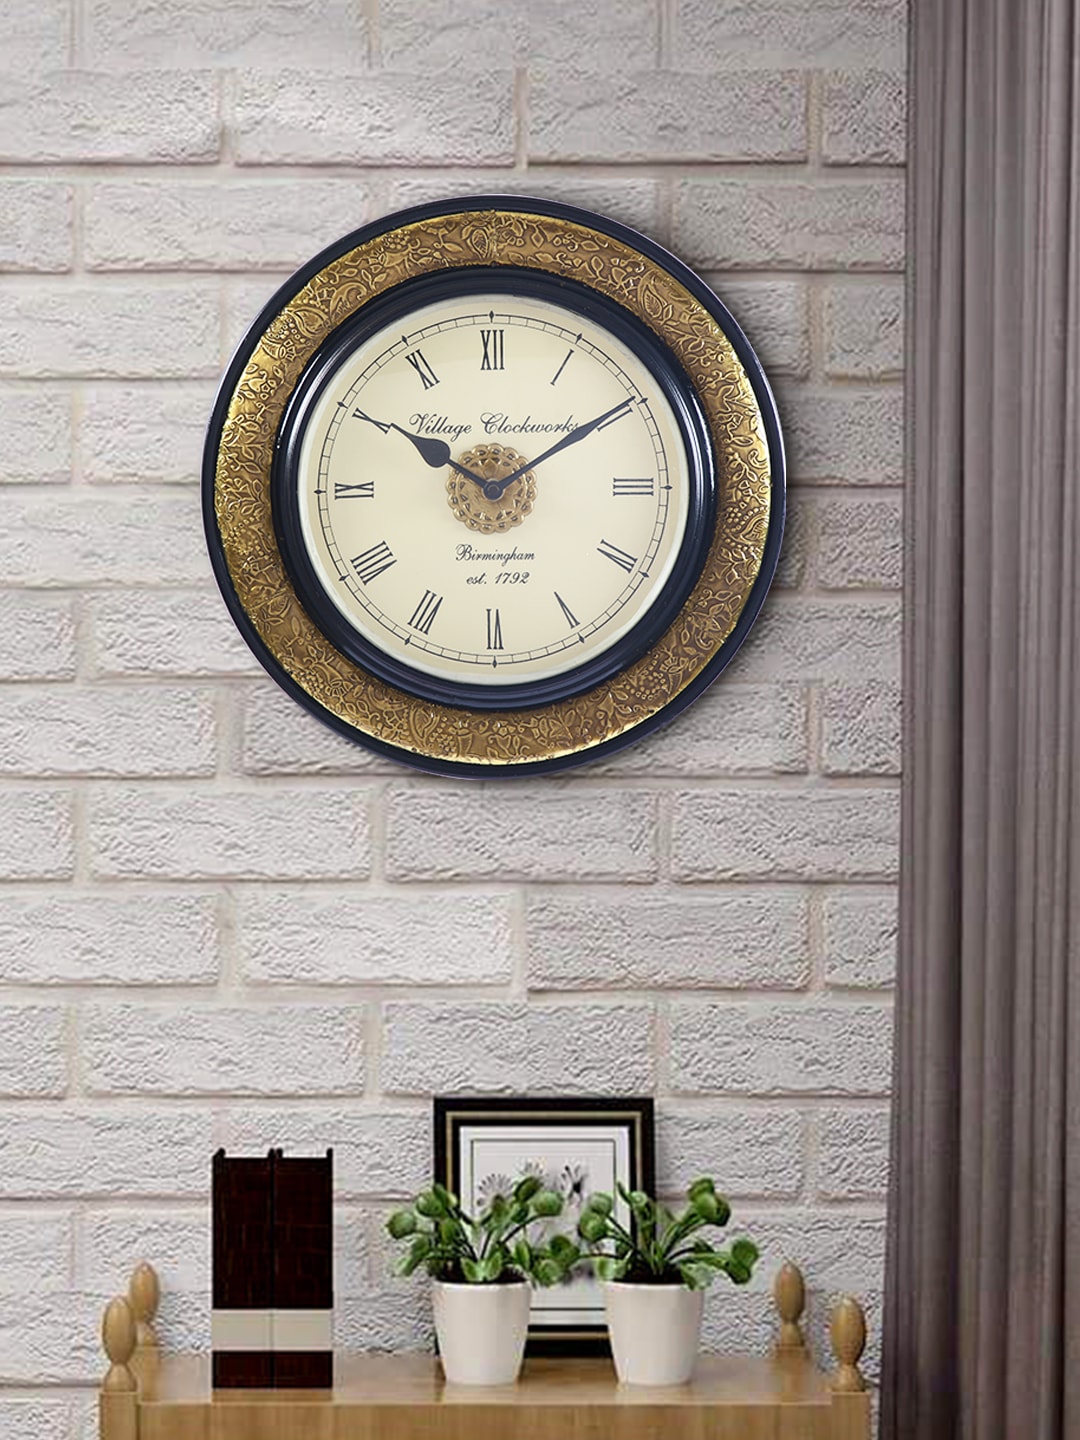 Aapno Rajasthan Gold-Toned & Black Textured Traditional Wall Clock Price in India